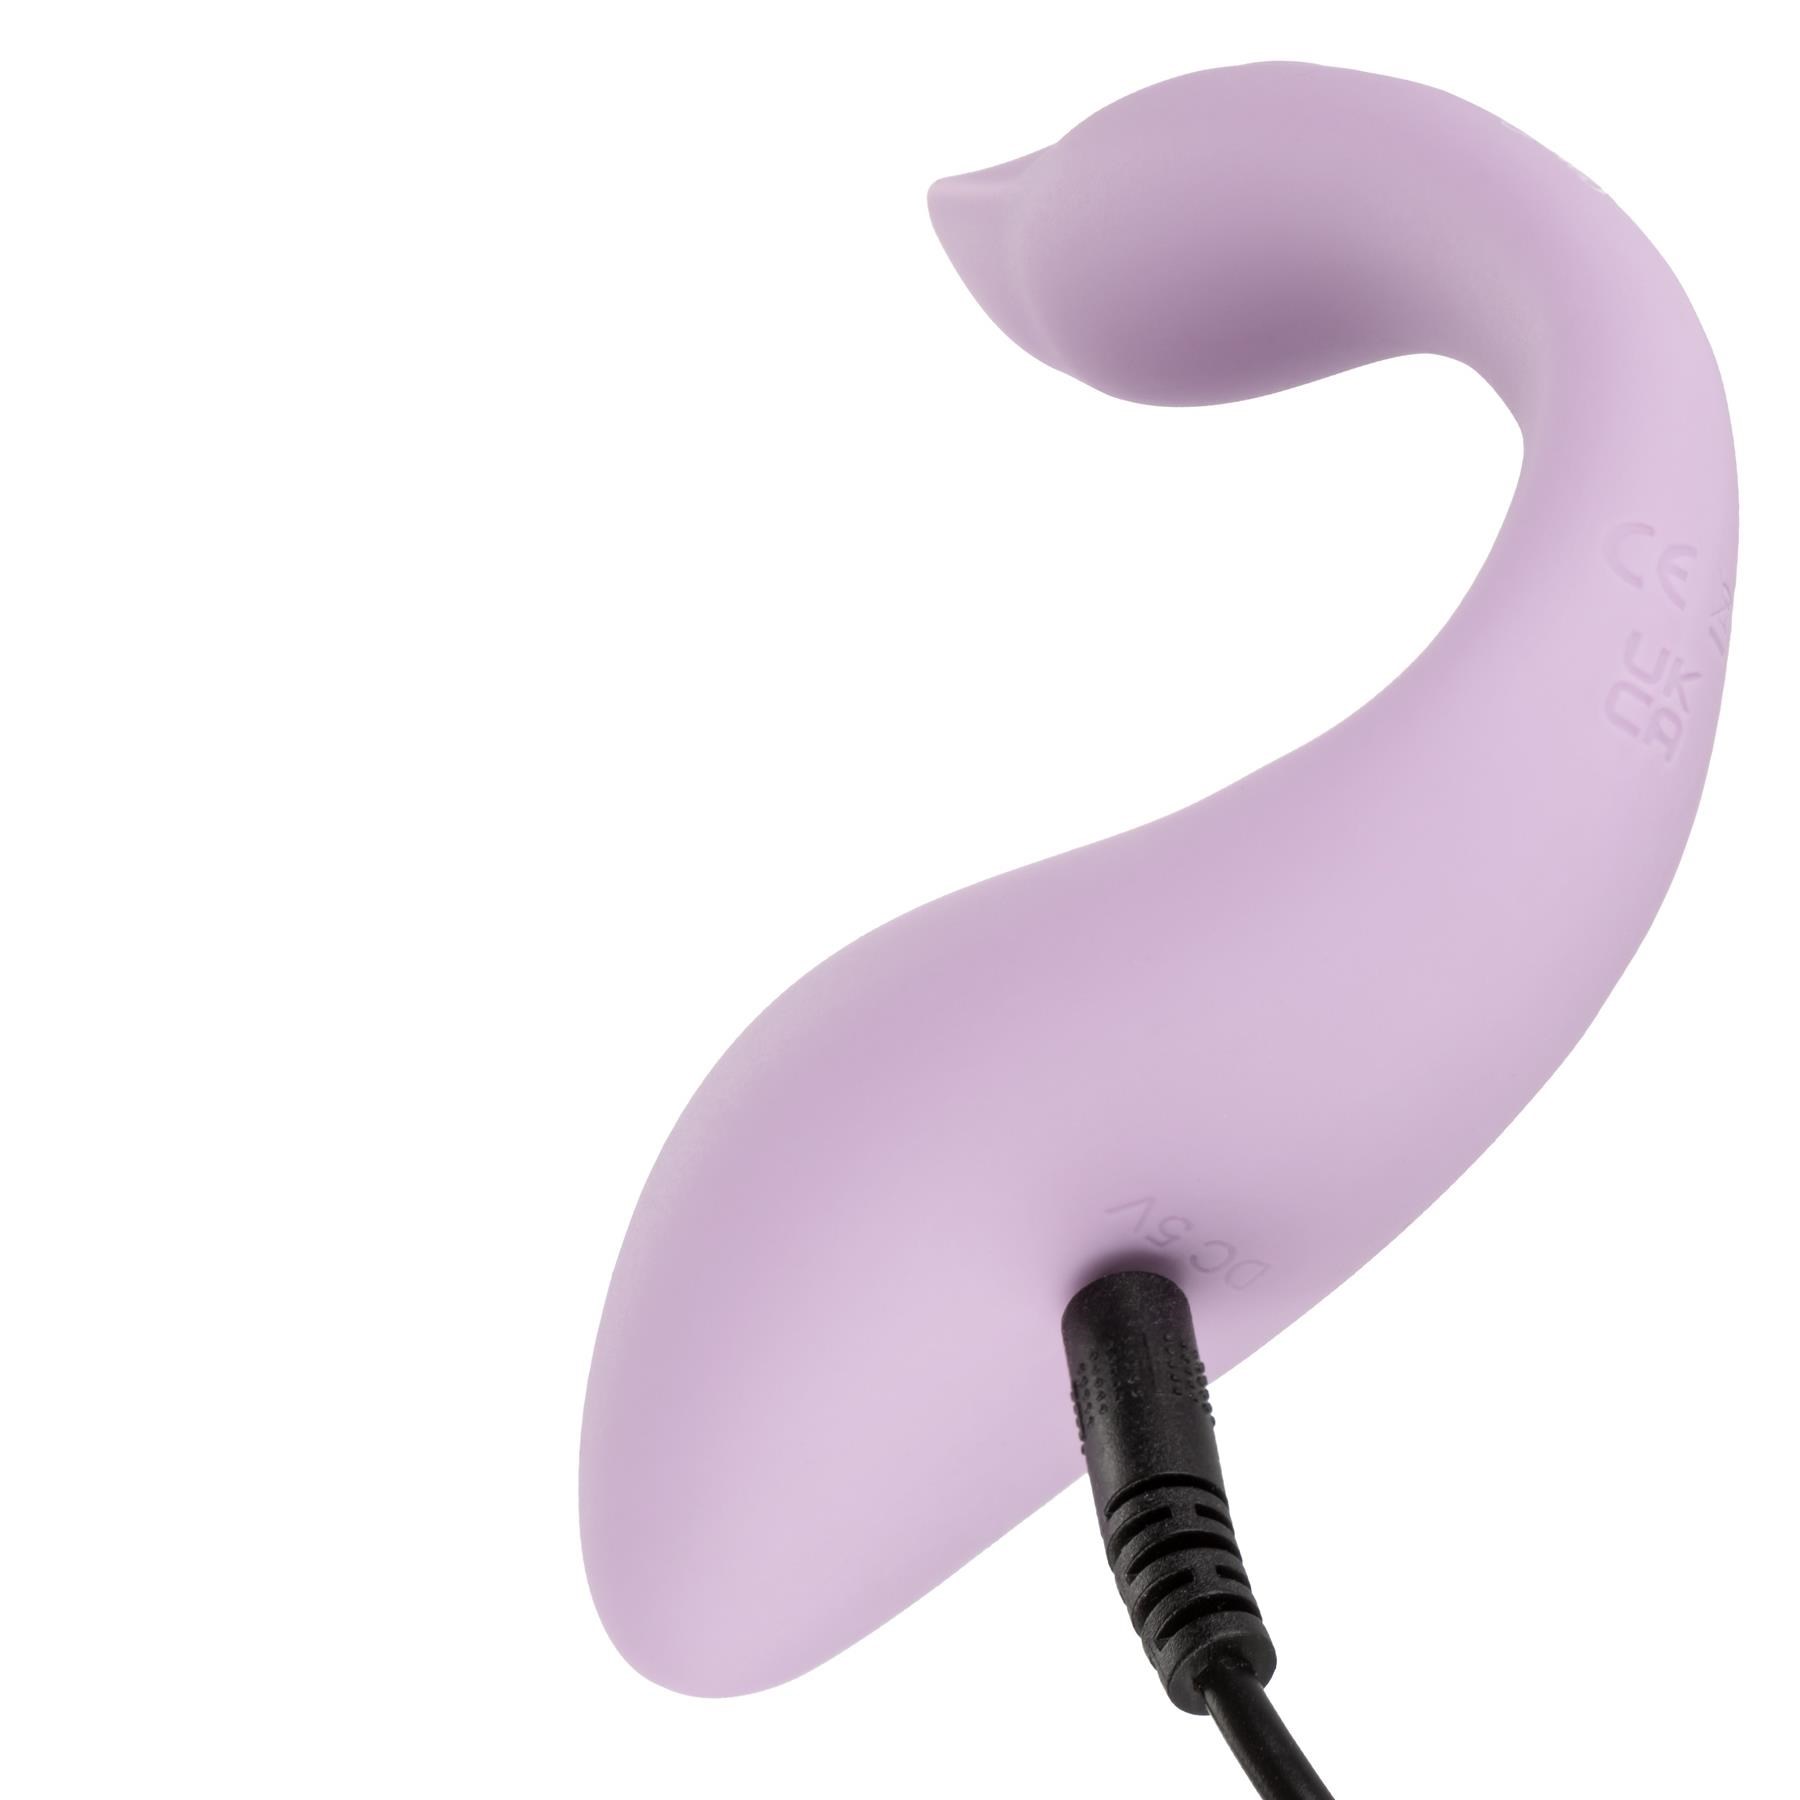 Slay #FlexMe Couples Vibrator - Product Shot Showing Where Charging Cable is Placed